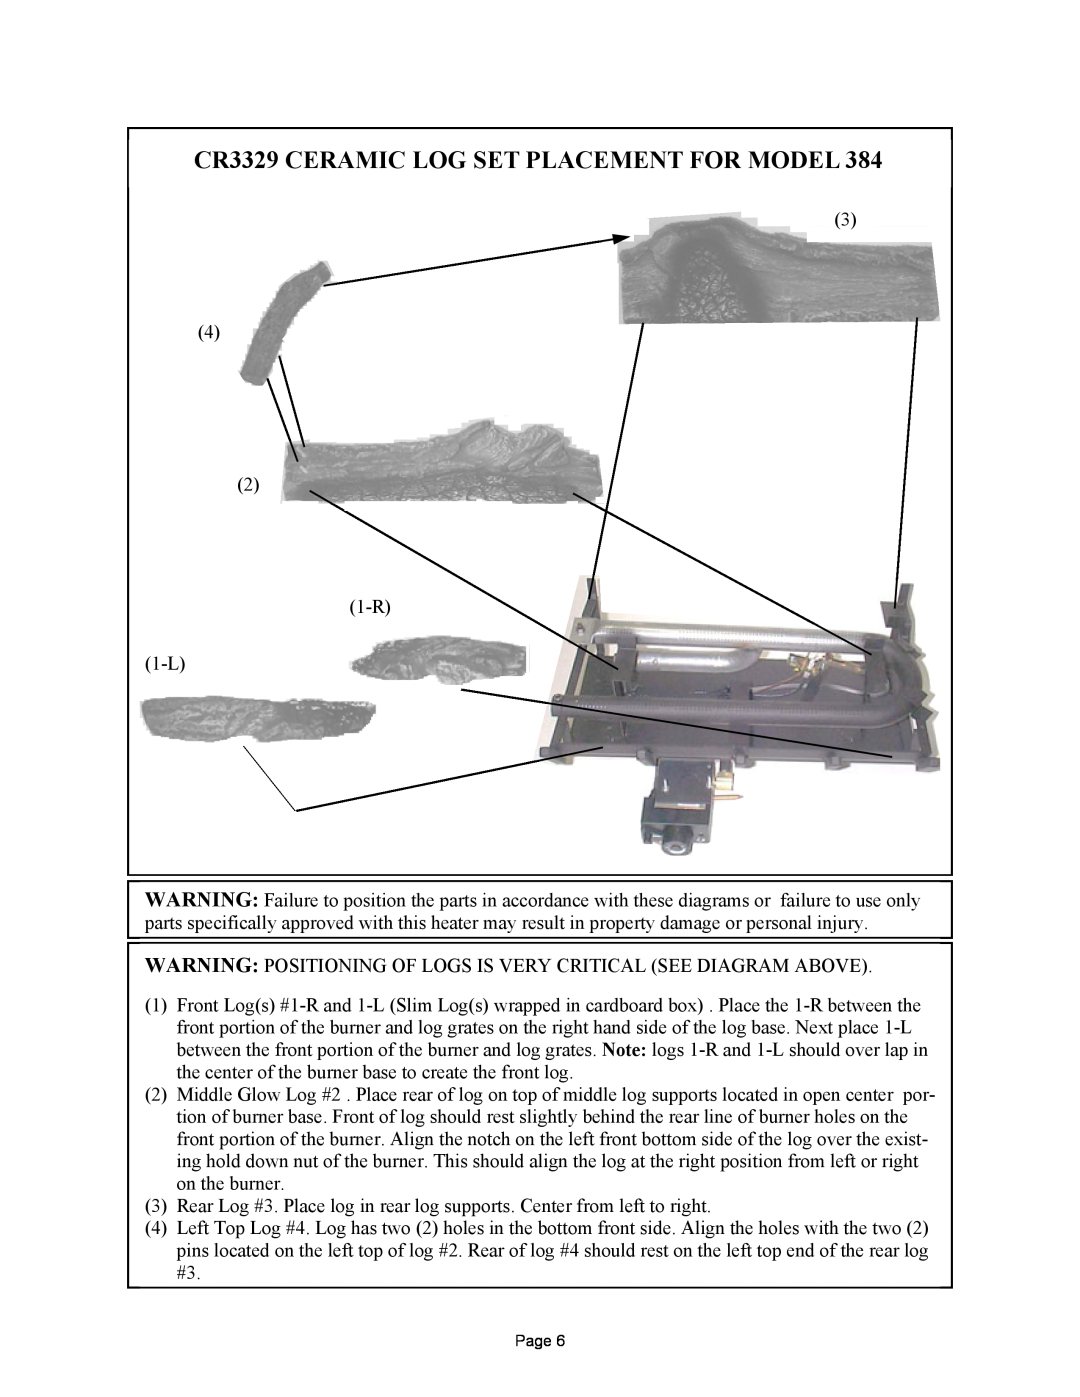 New Buck Corporation 384 manual Page 